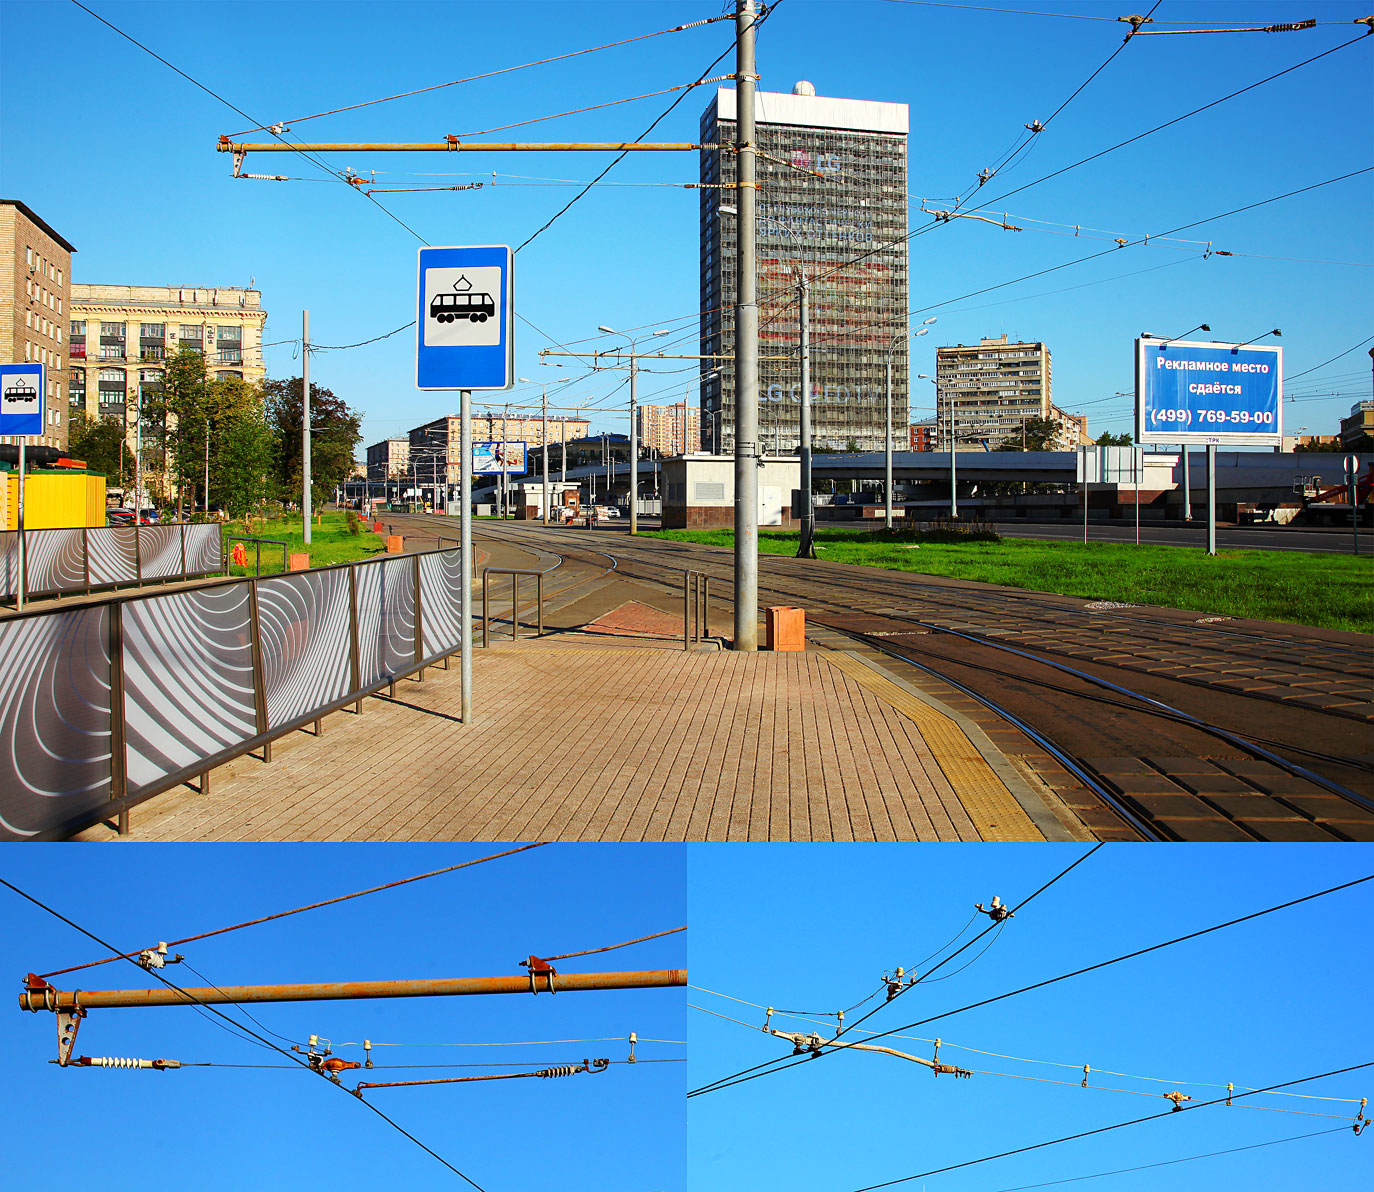 Maskva — Electric power service — Miscellaneous photos; Maskva — Tram lines: Northern Administrative District